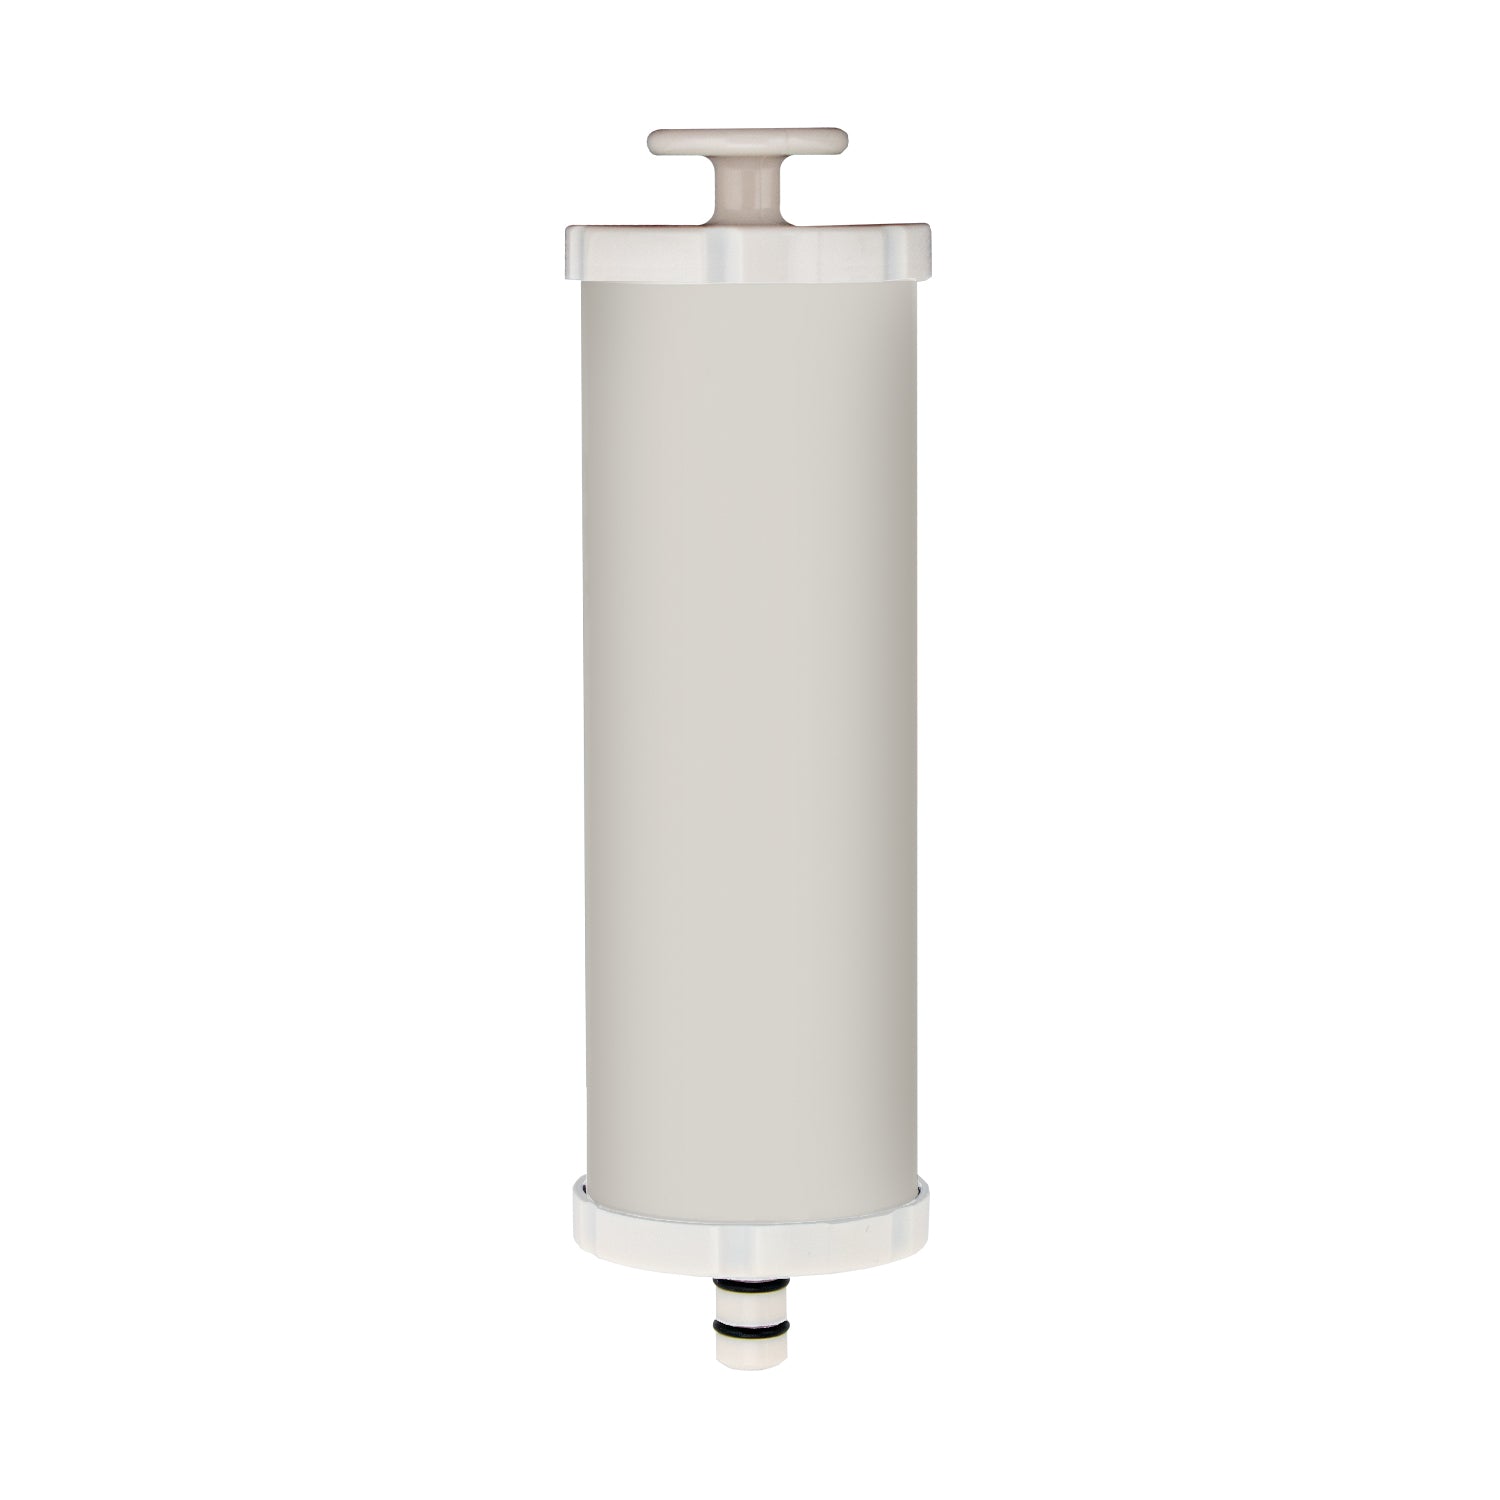 Water Ionizer Replacement Filters (LV9000 & LV500 & LV-700)【AQUA